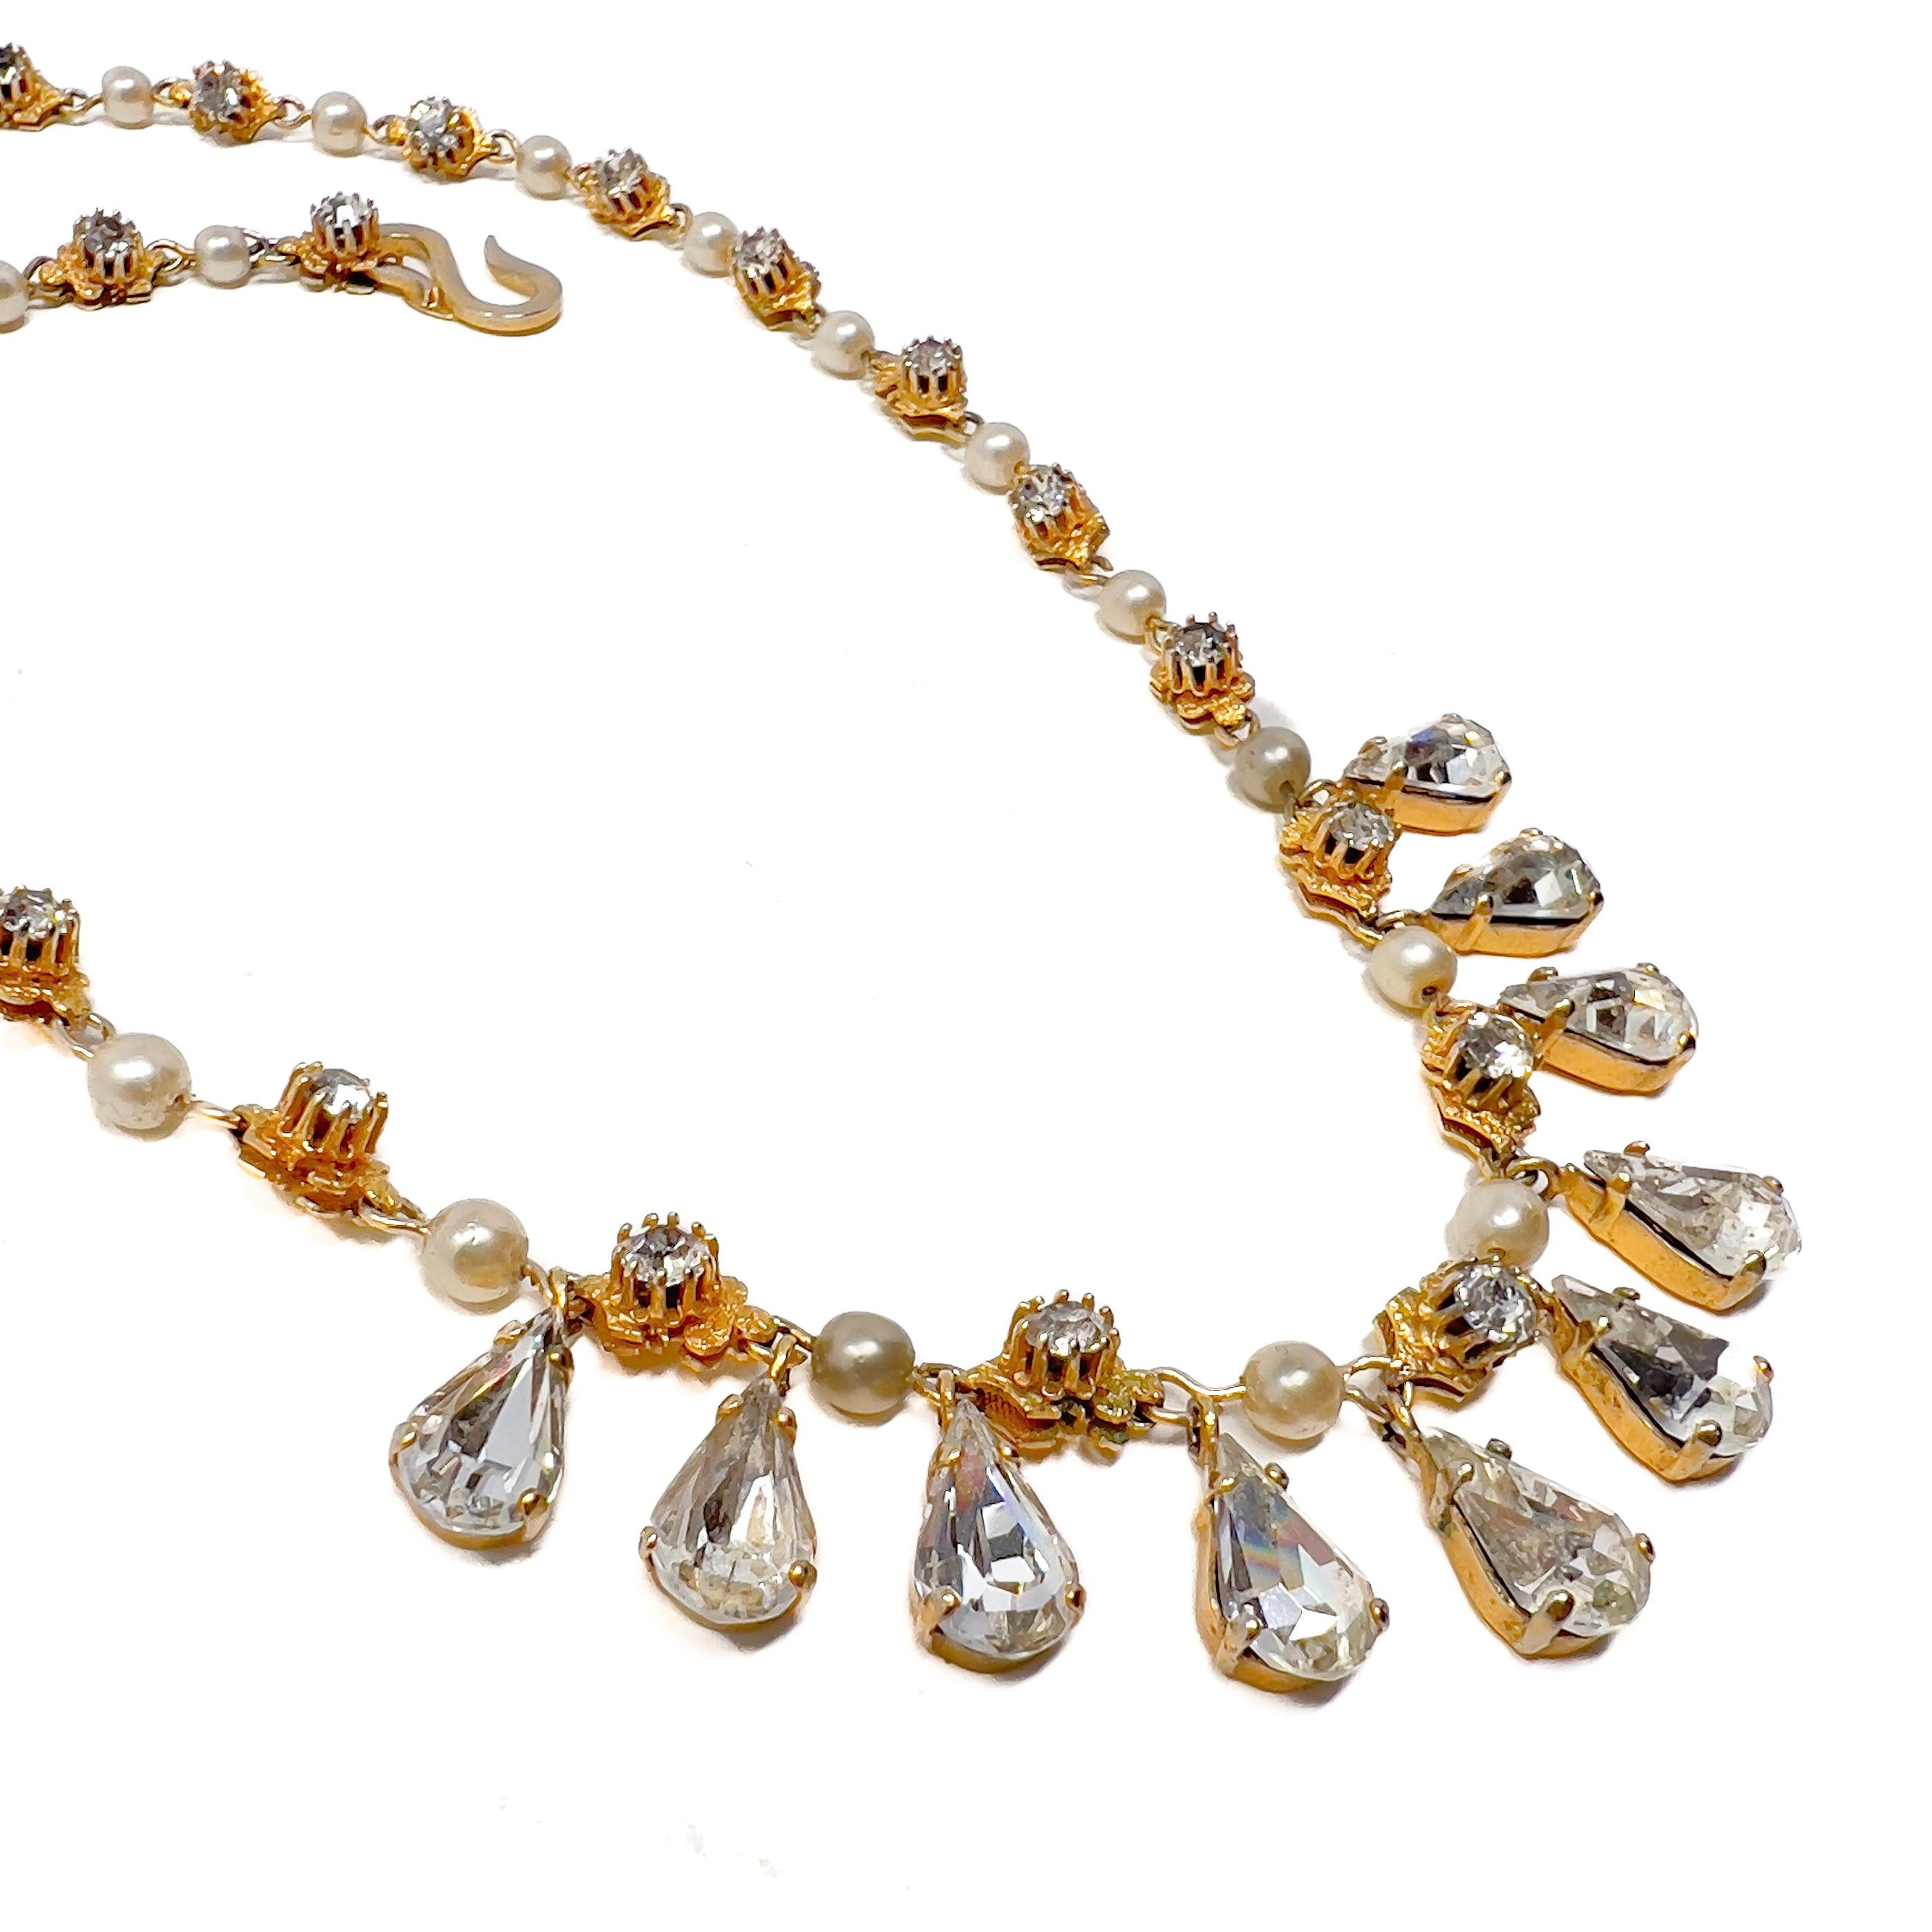 Christian Dior by Mitchel Maer 1952-1956 Vintage Rhinestone and Pearl Necklace For Sale 2